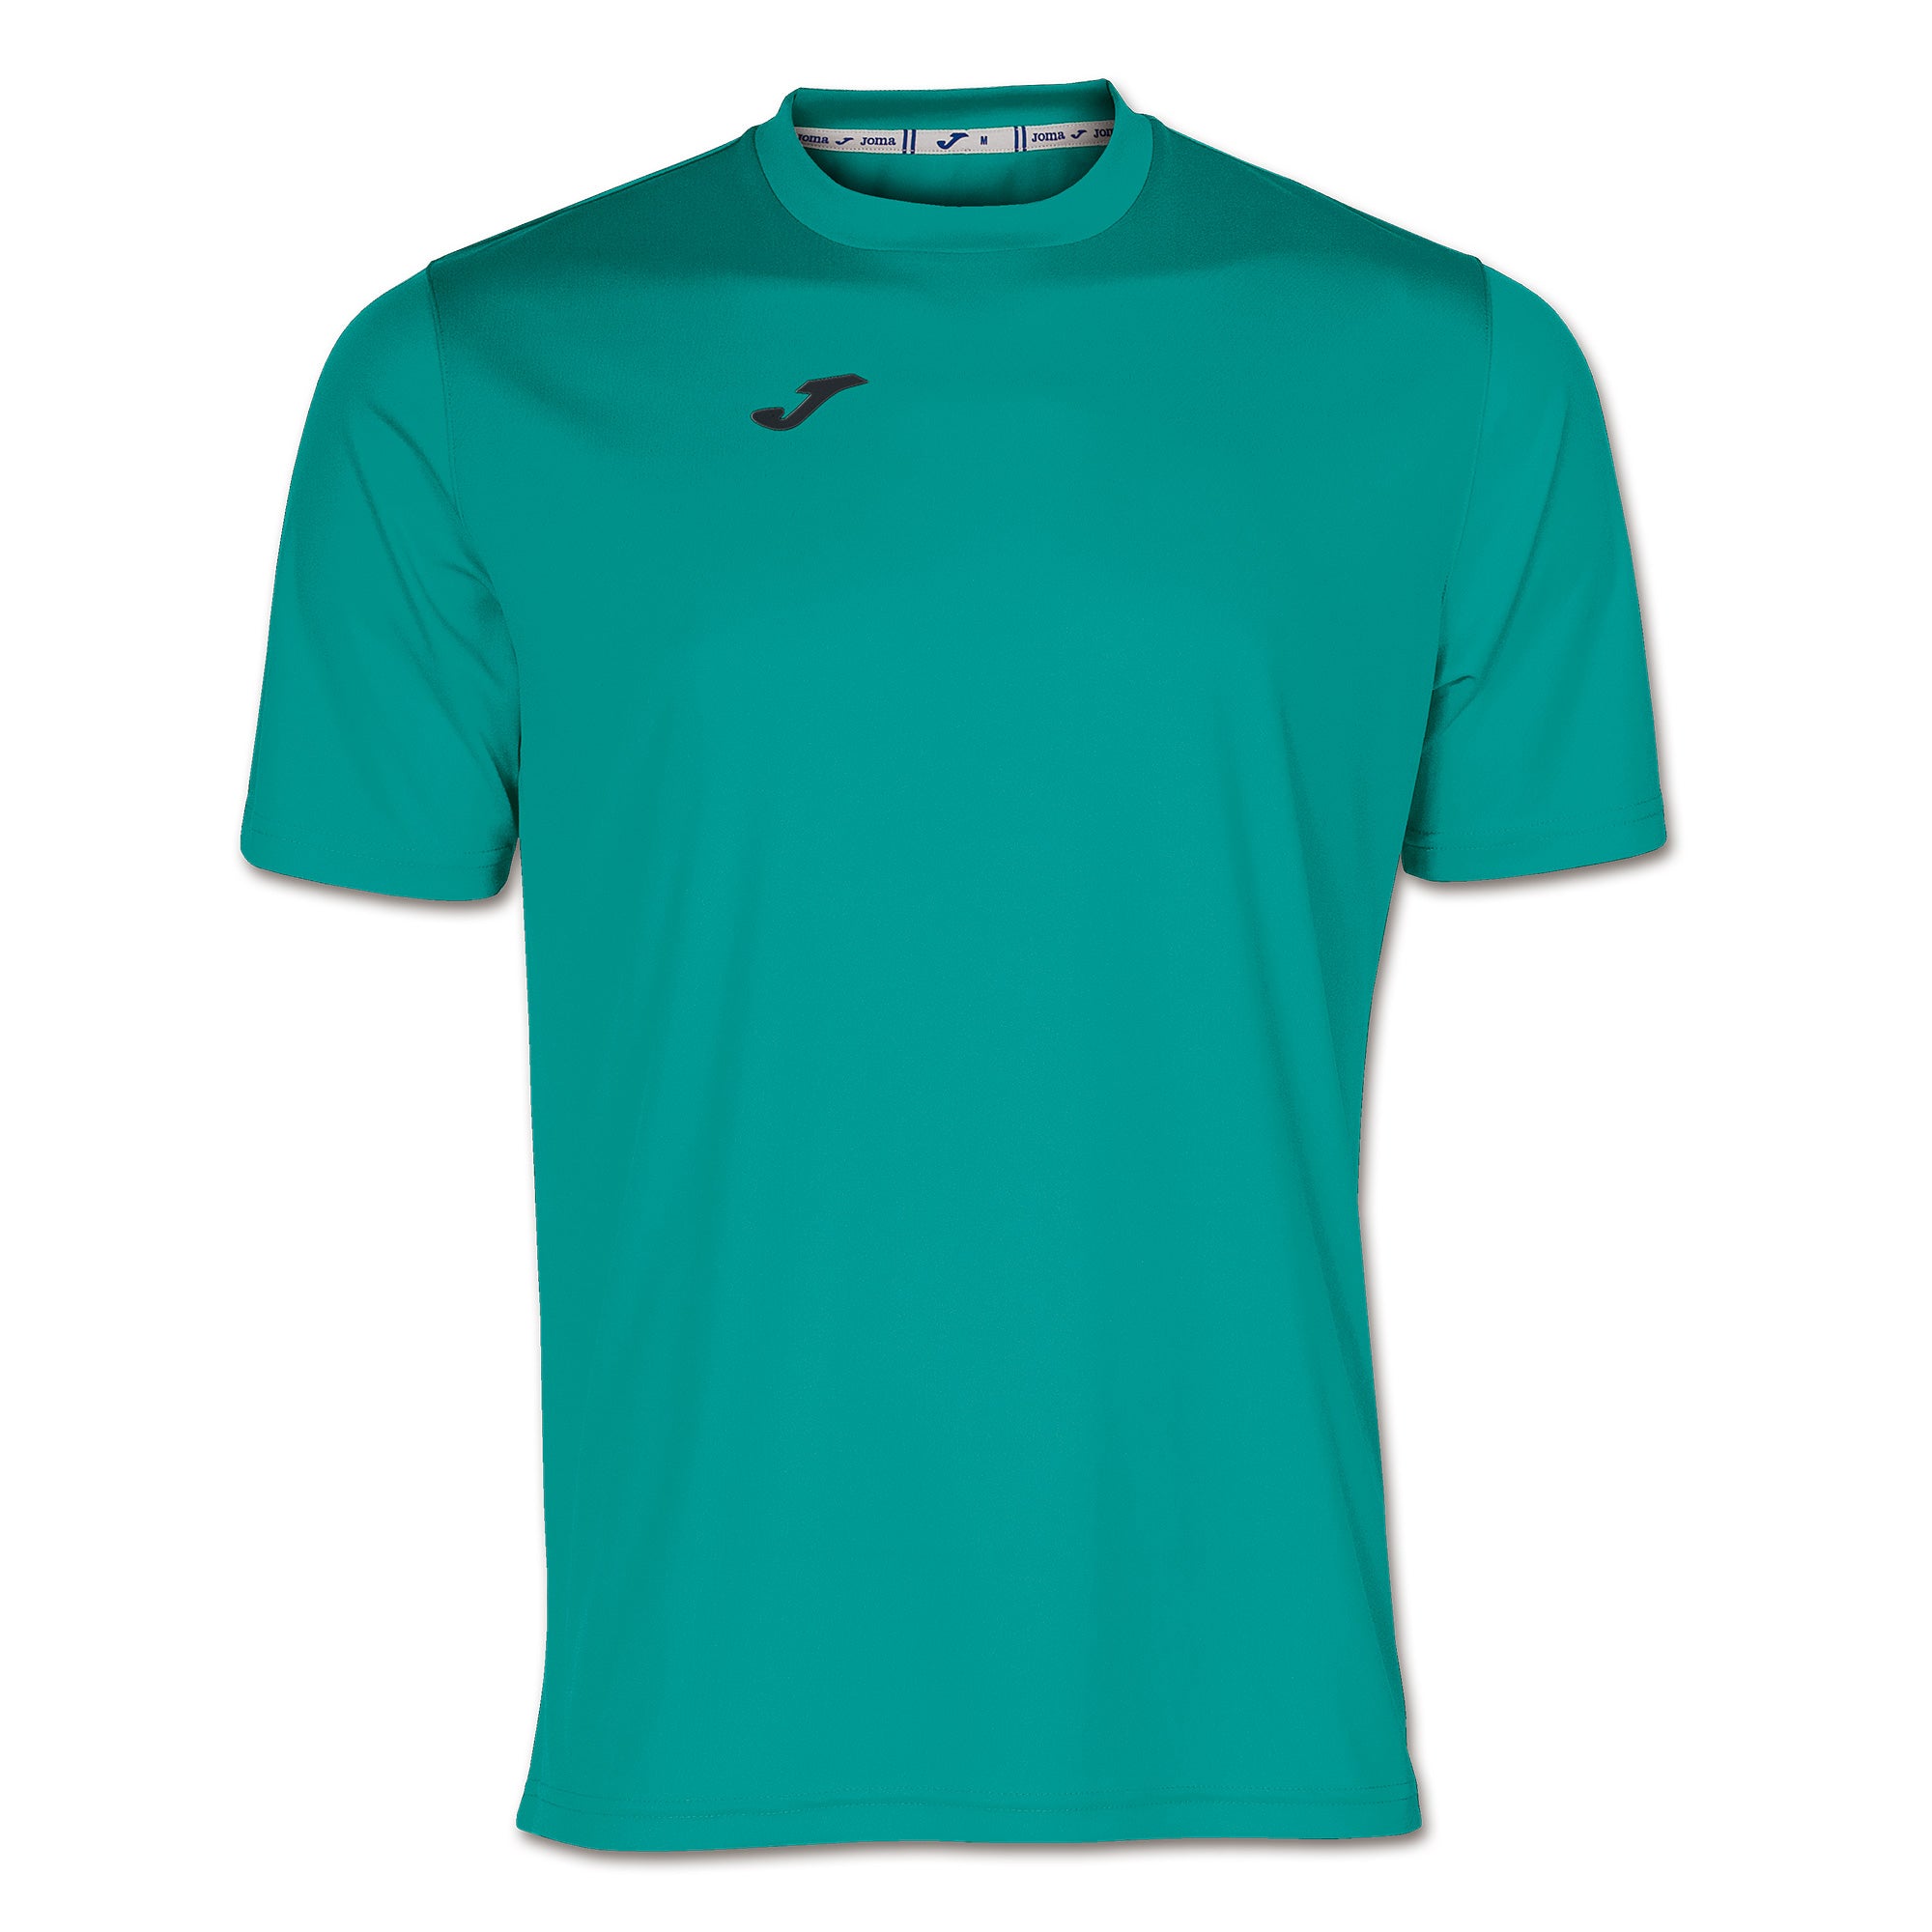 Joma Combi Short Sleeved T-Shirt - Turquoise Green